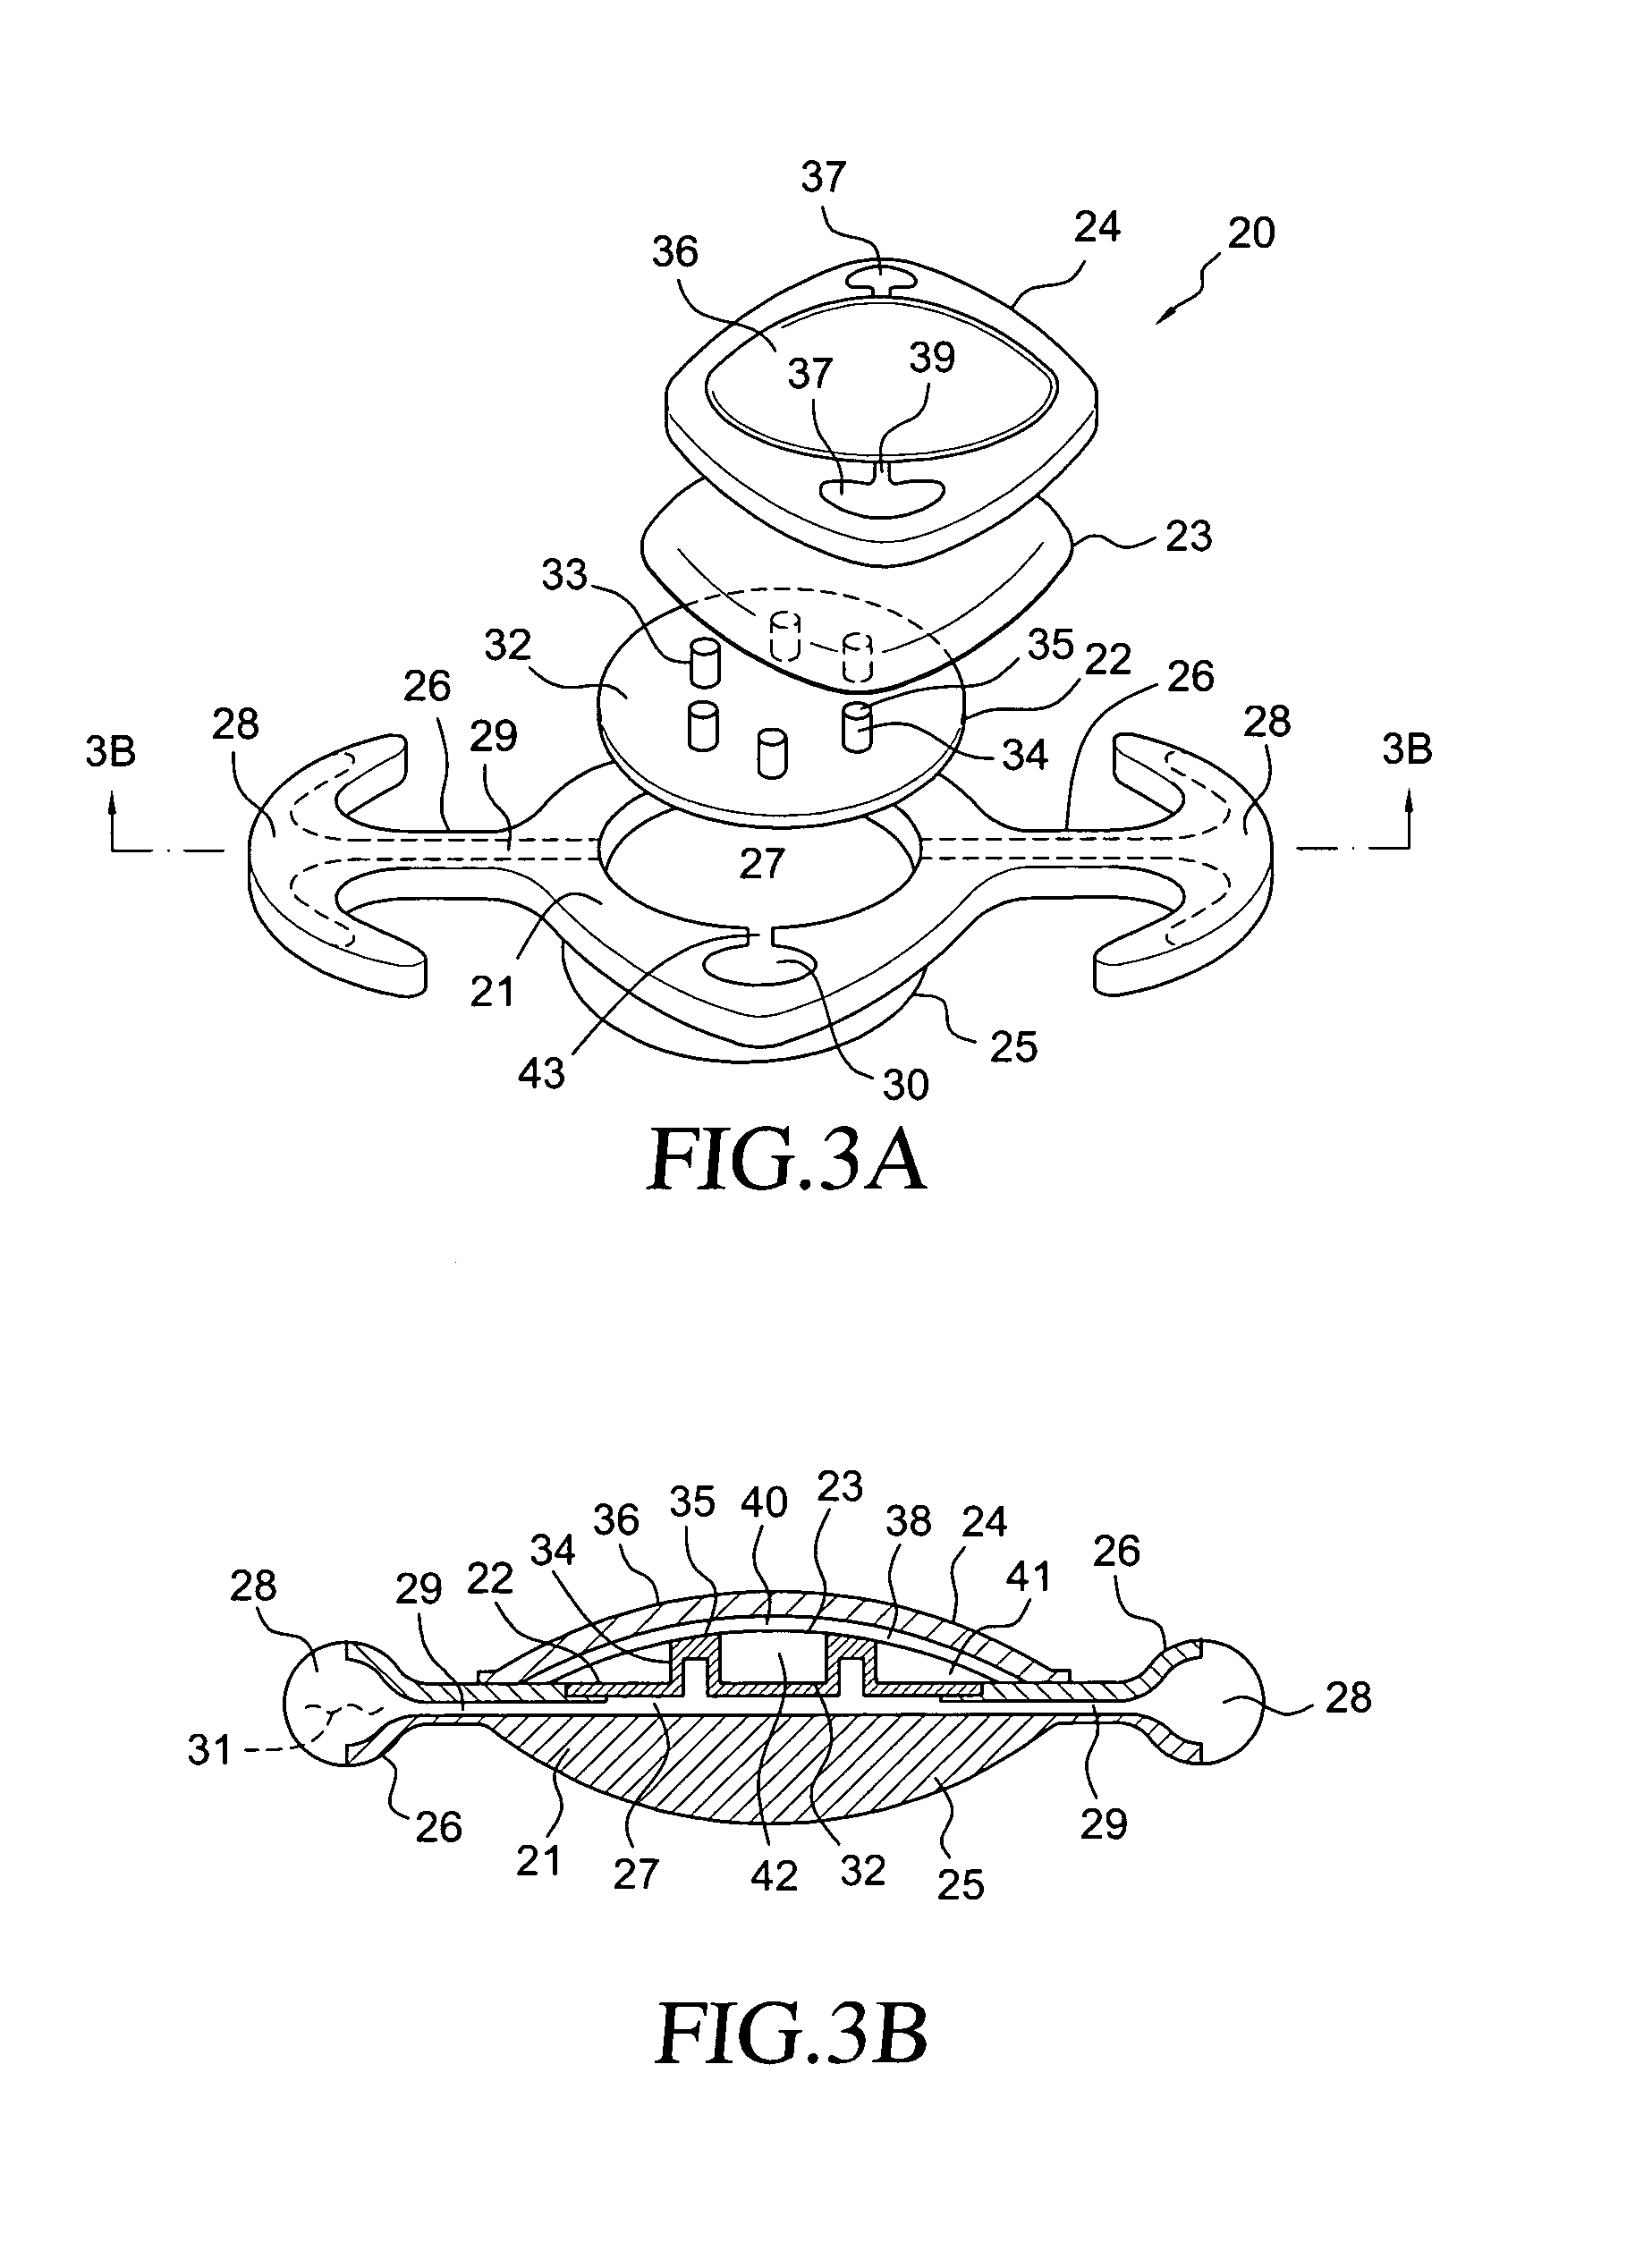 Accommodating intraocular lens having peripherally actuated deflectable surface and method